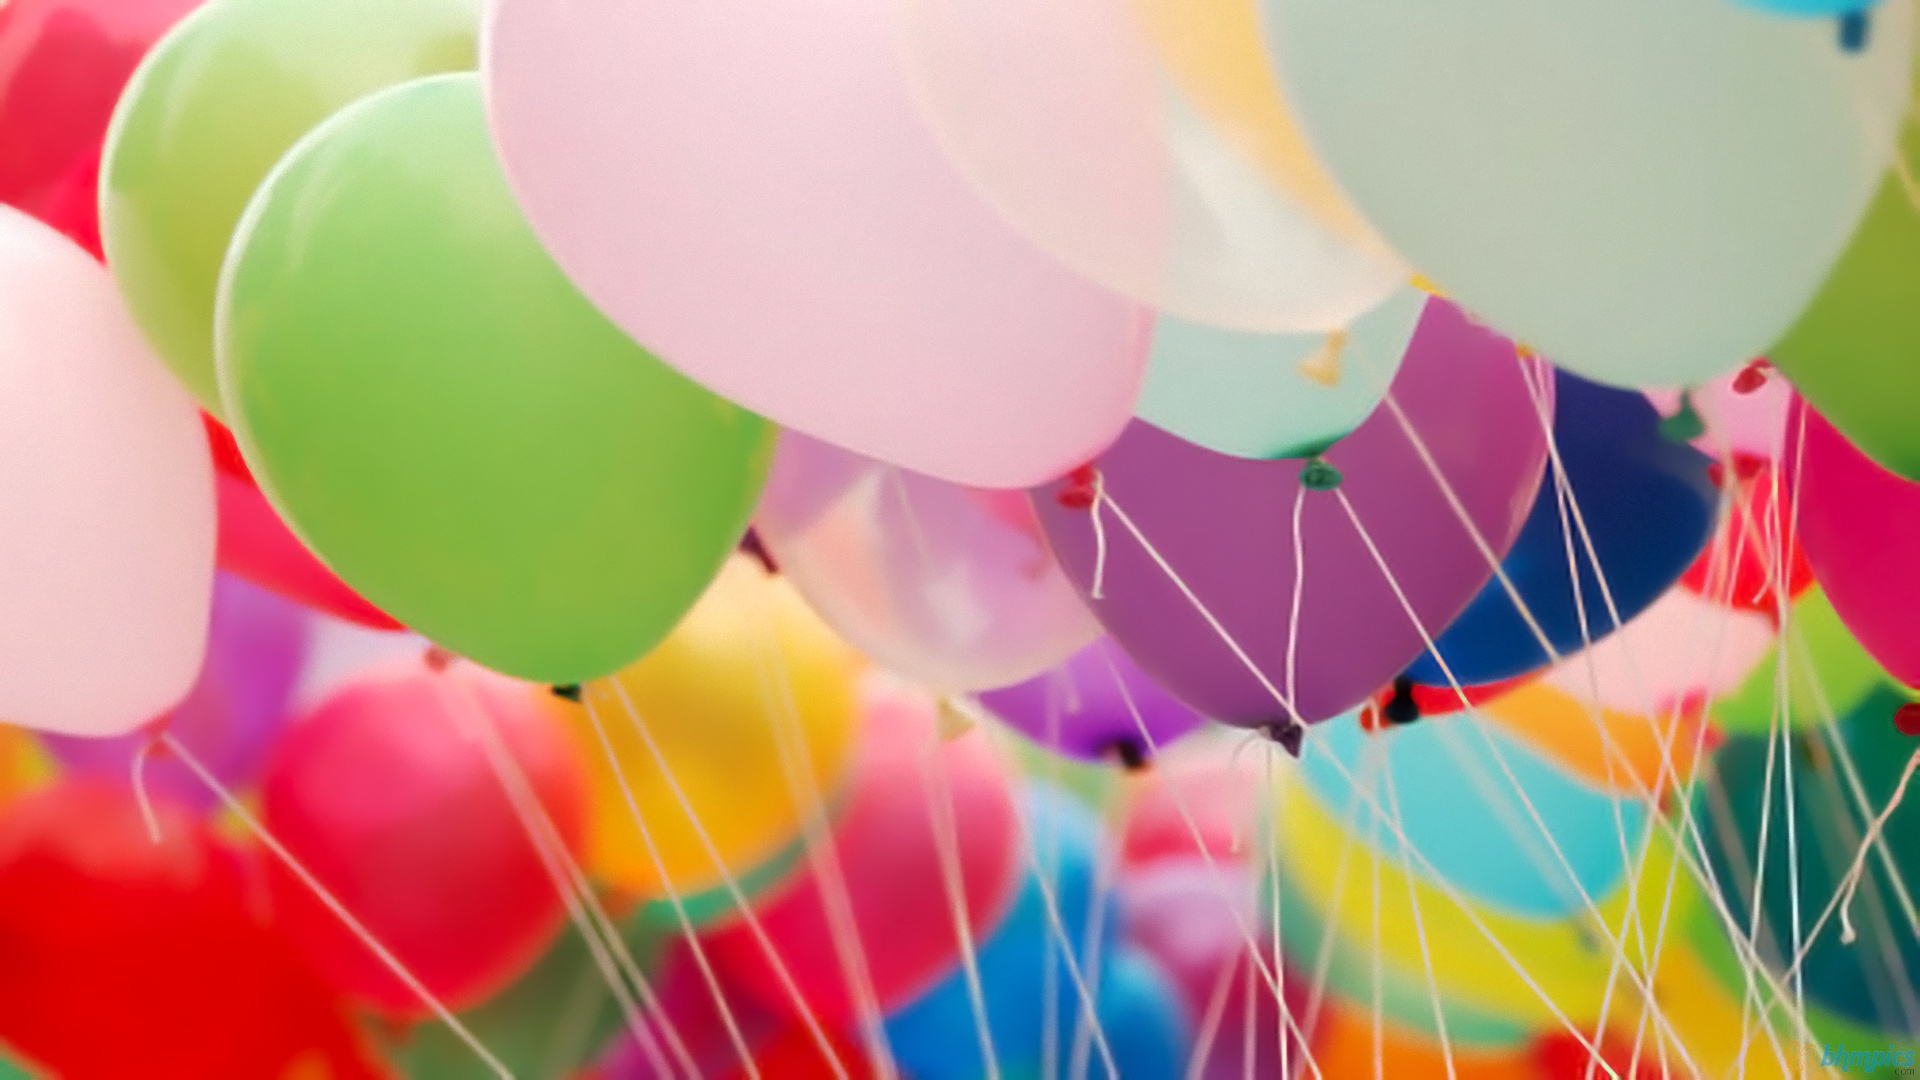 colorful_balloons-1920x1080